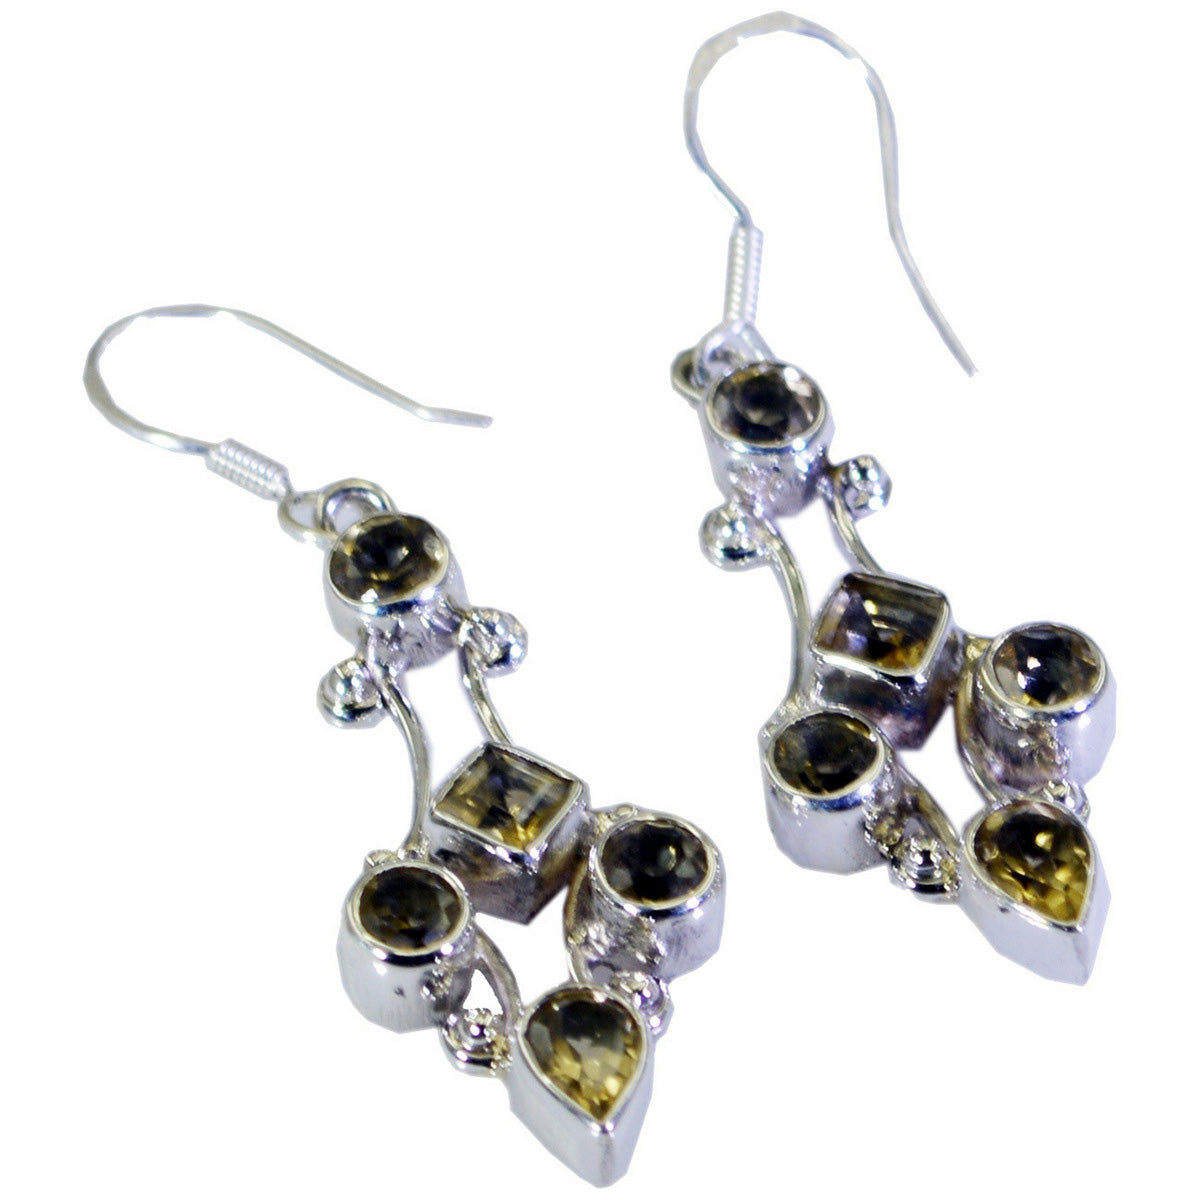 Riyo Nice Gemstone multi shape Faceted Yellow Citrine Silver Earring gift for valentine's day